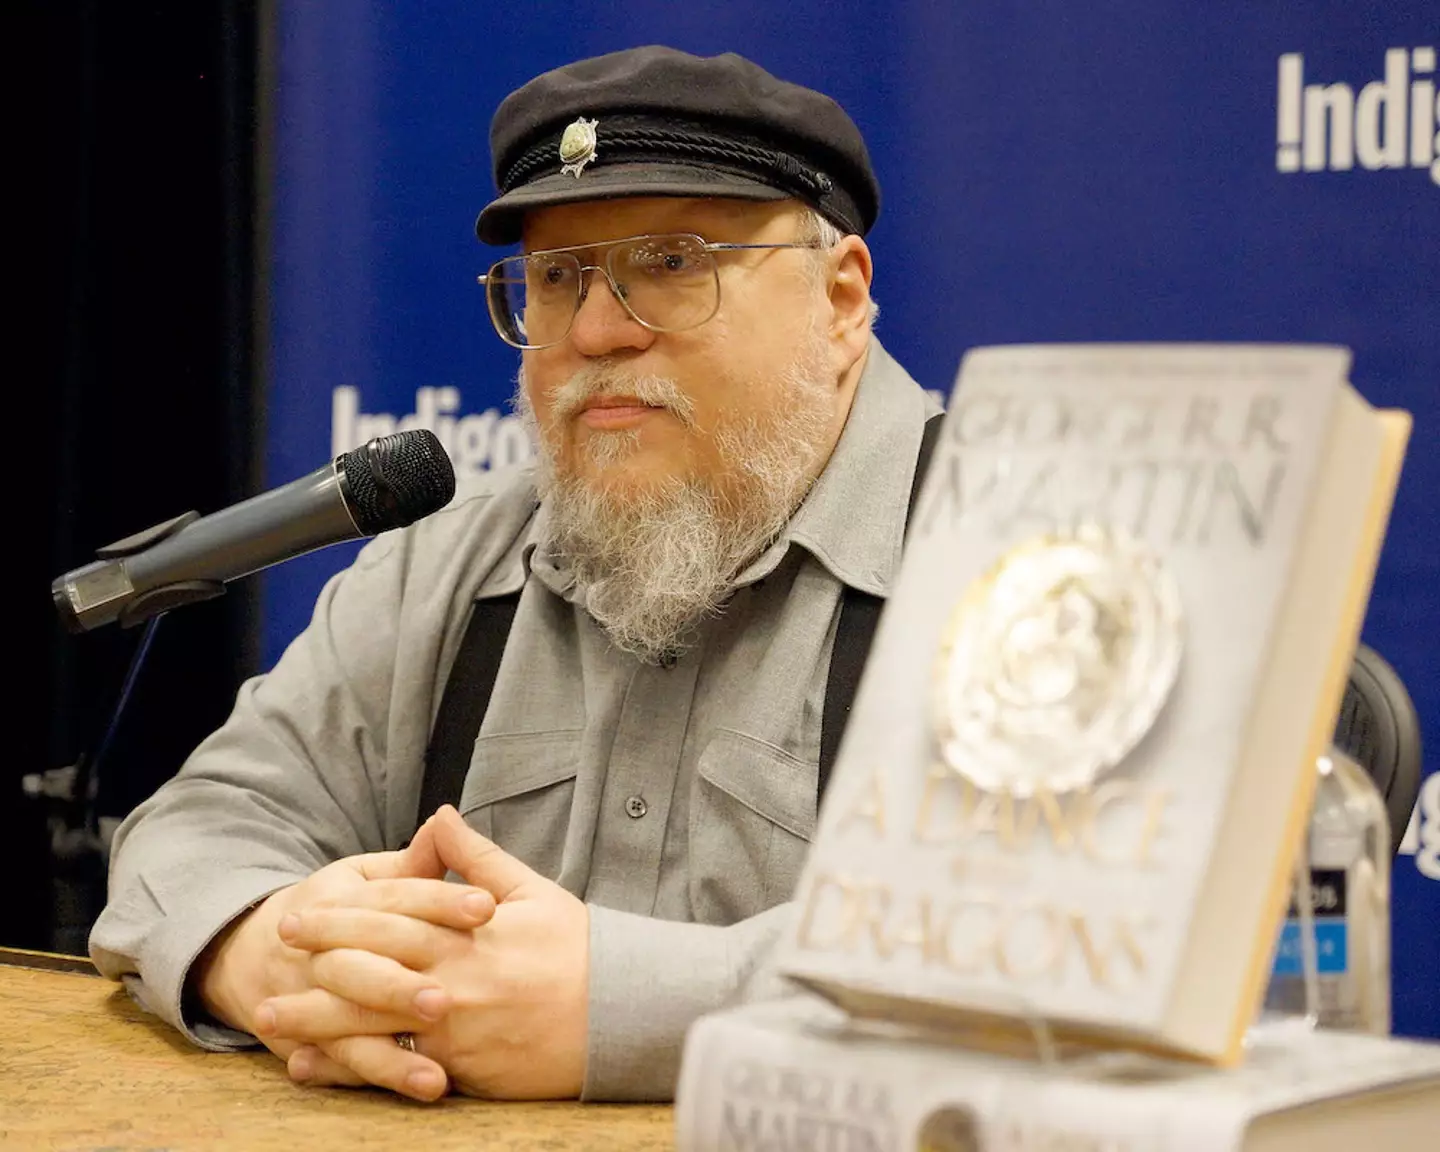 George R.R. Martin isn't too happy about the reaction to Game of Throne's eighth and final season.